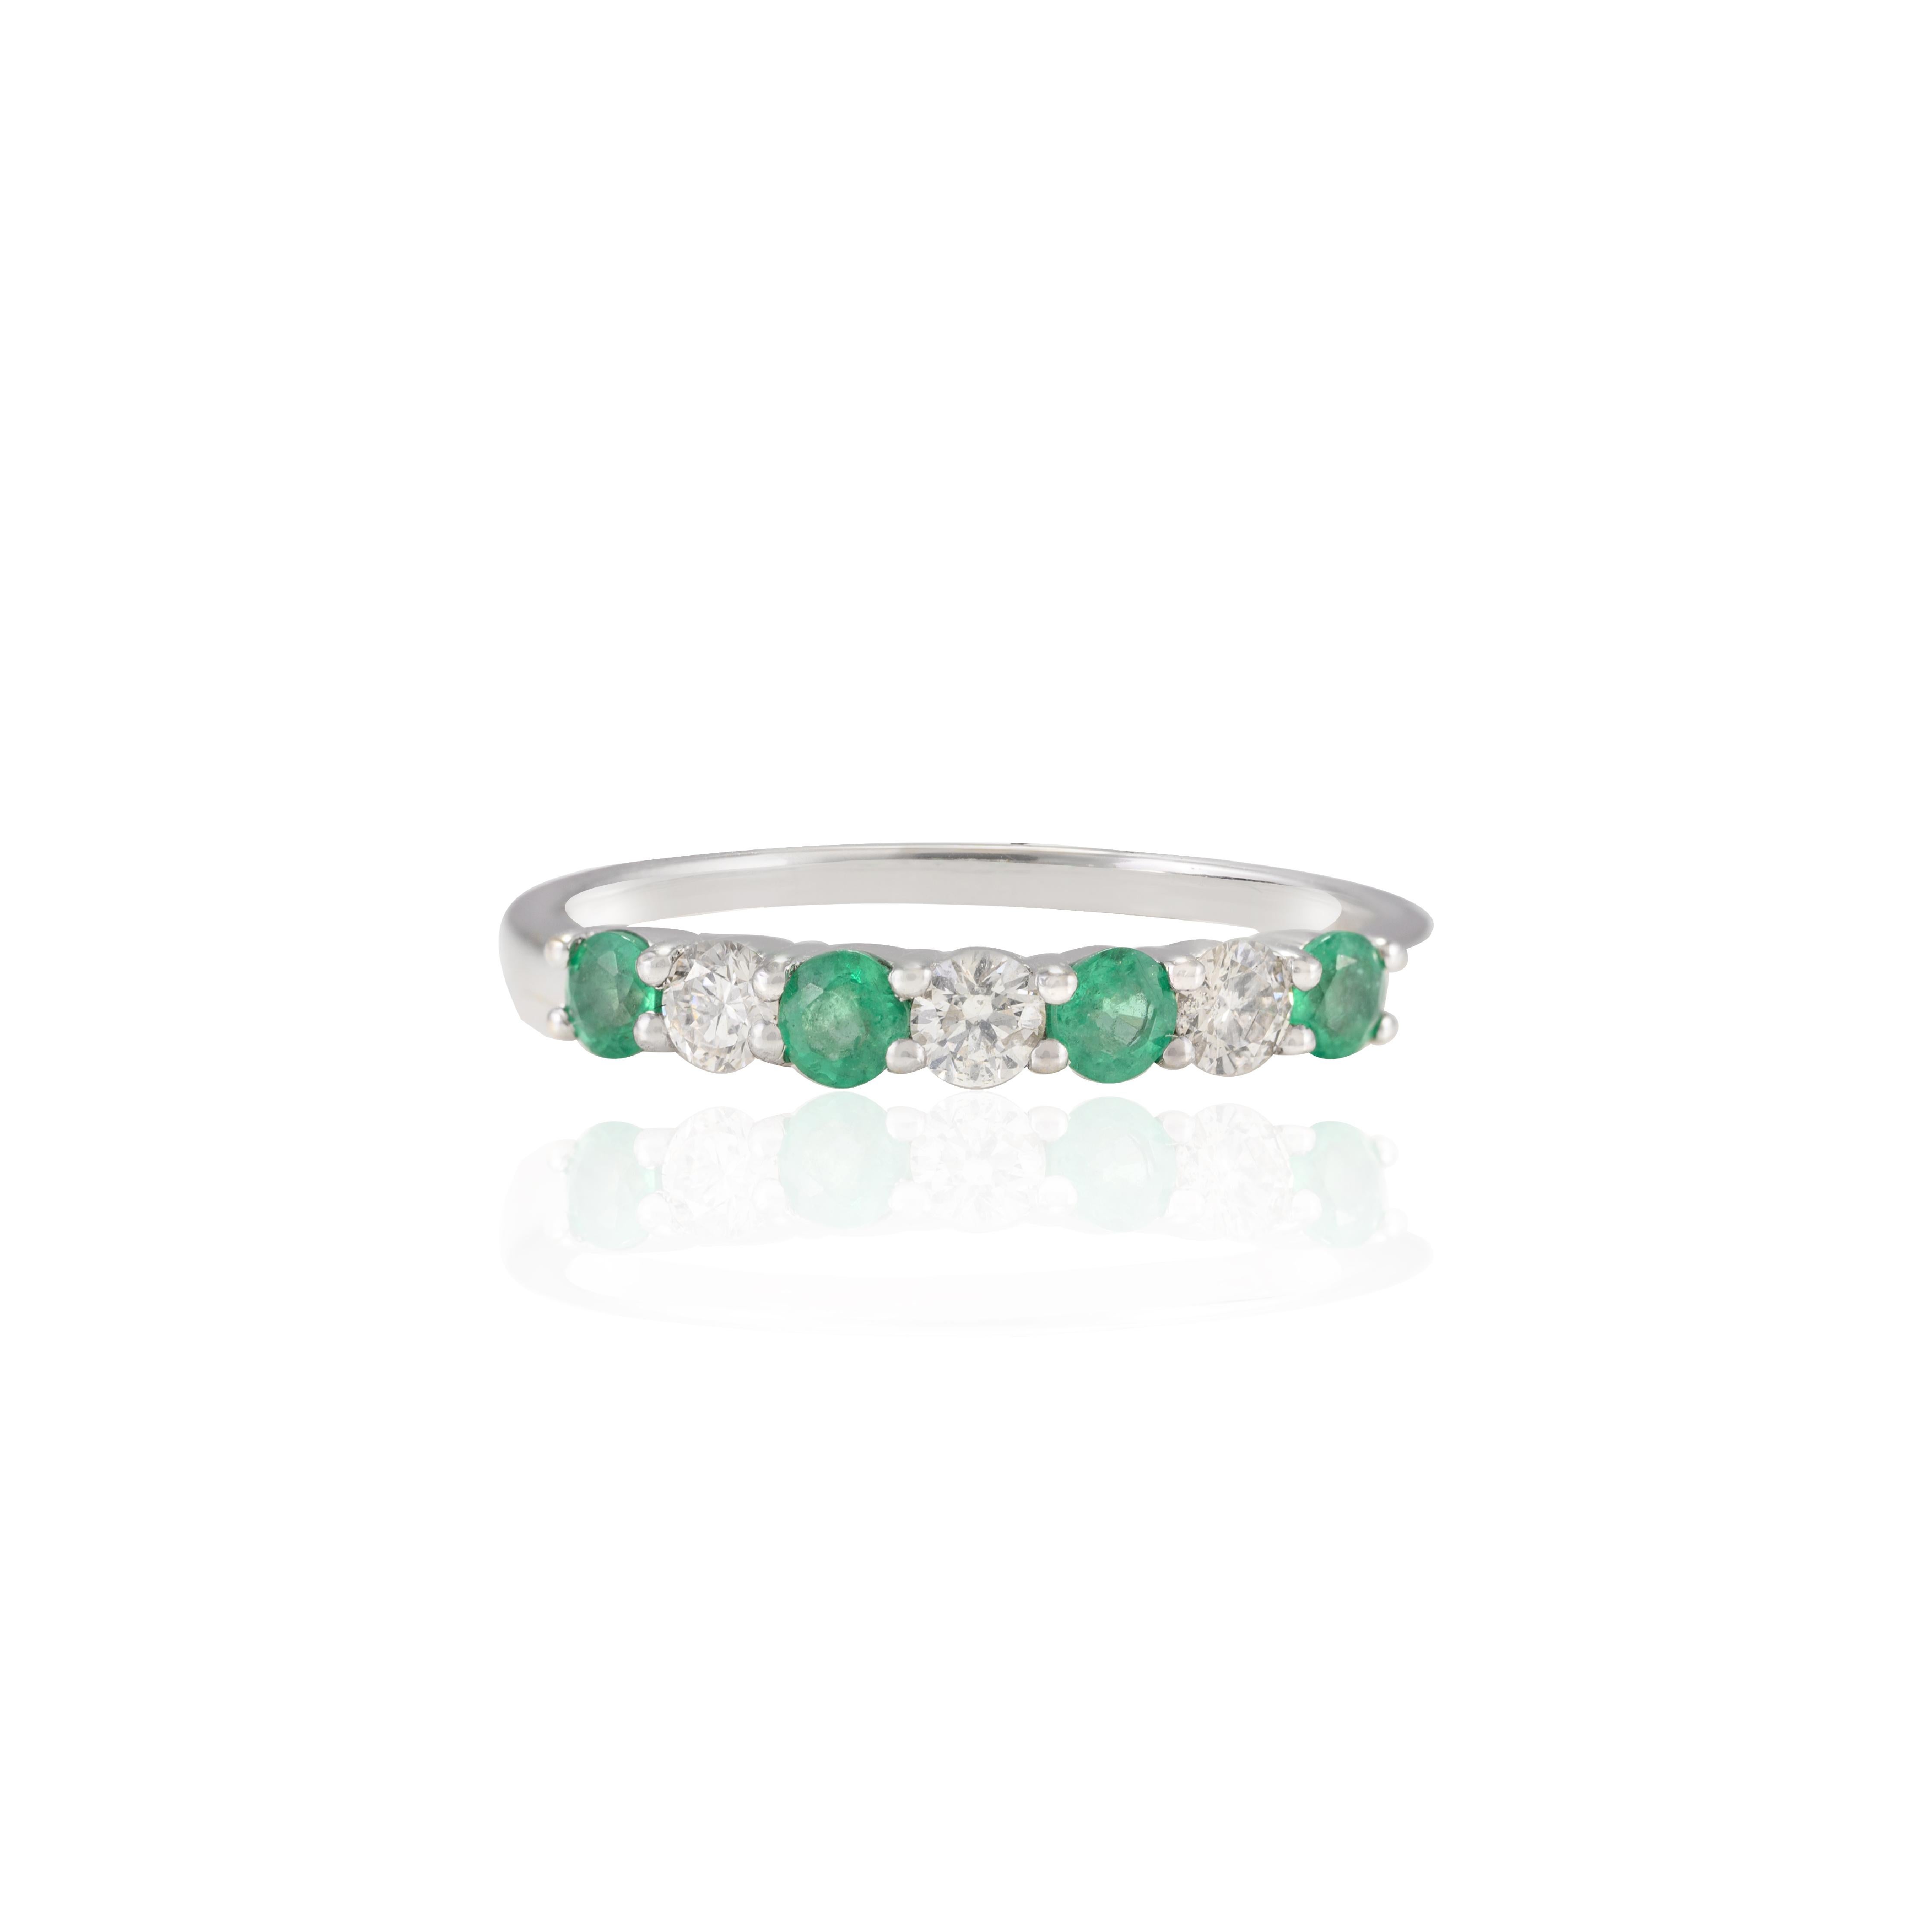 For Sale:  Dainty Natural Emerald and Diamond Band Set in 18k Solid White Gold Setting 6